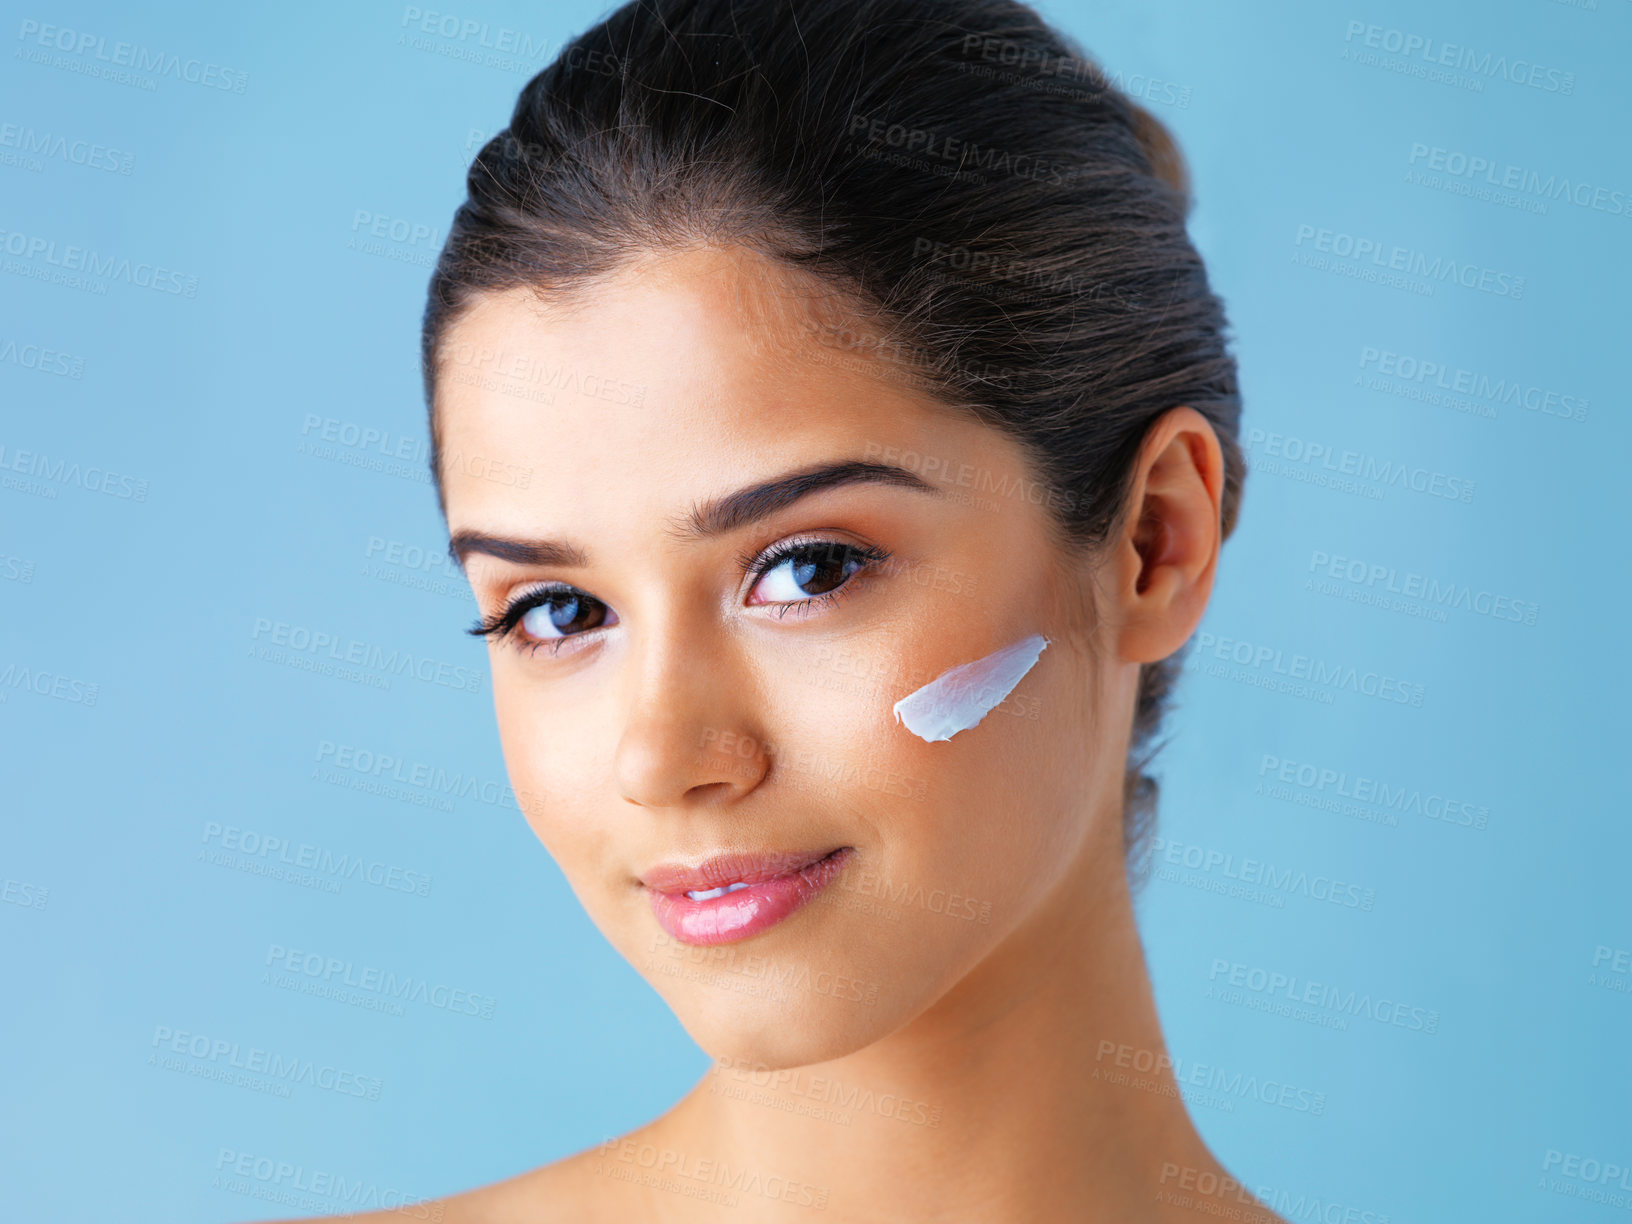 Buy stock photo Studio portrait of a beautiful young woman with lotion on her face against a blue background